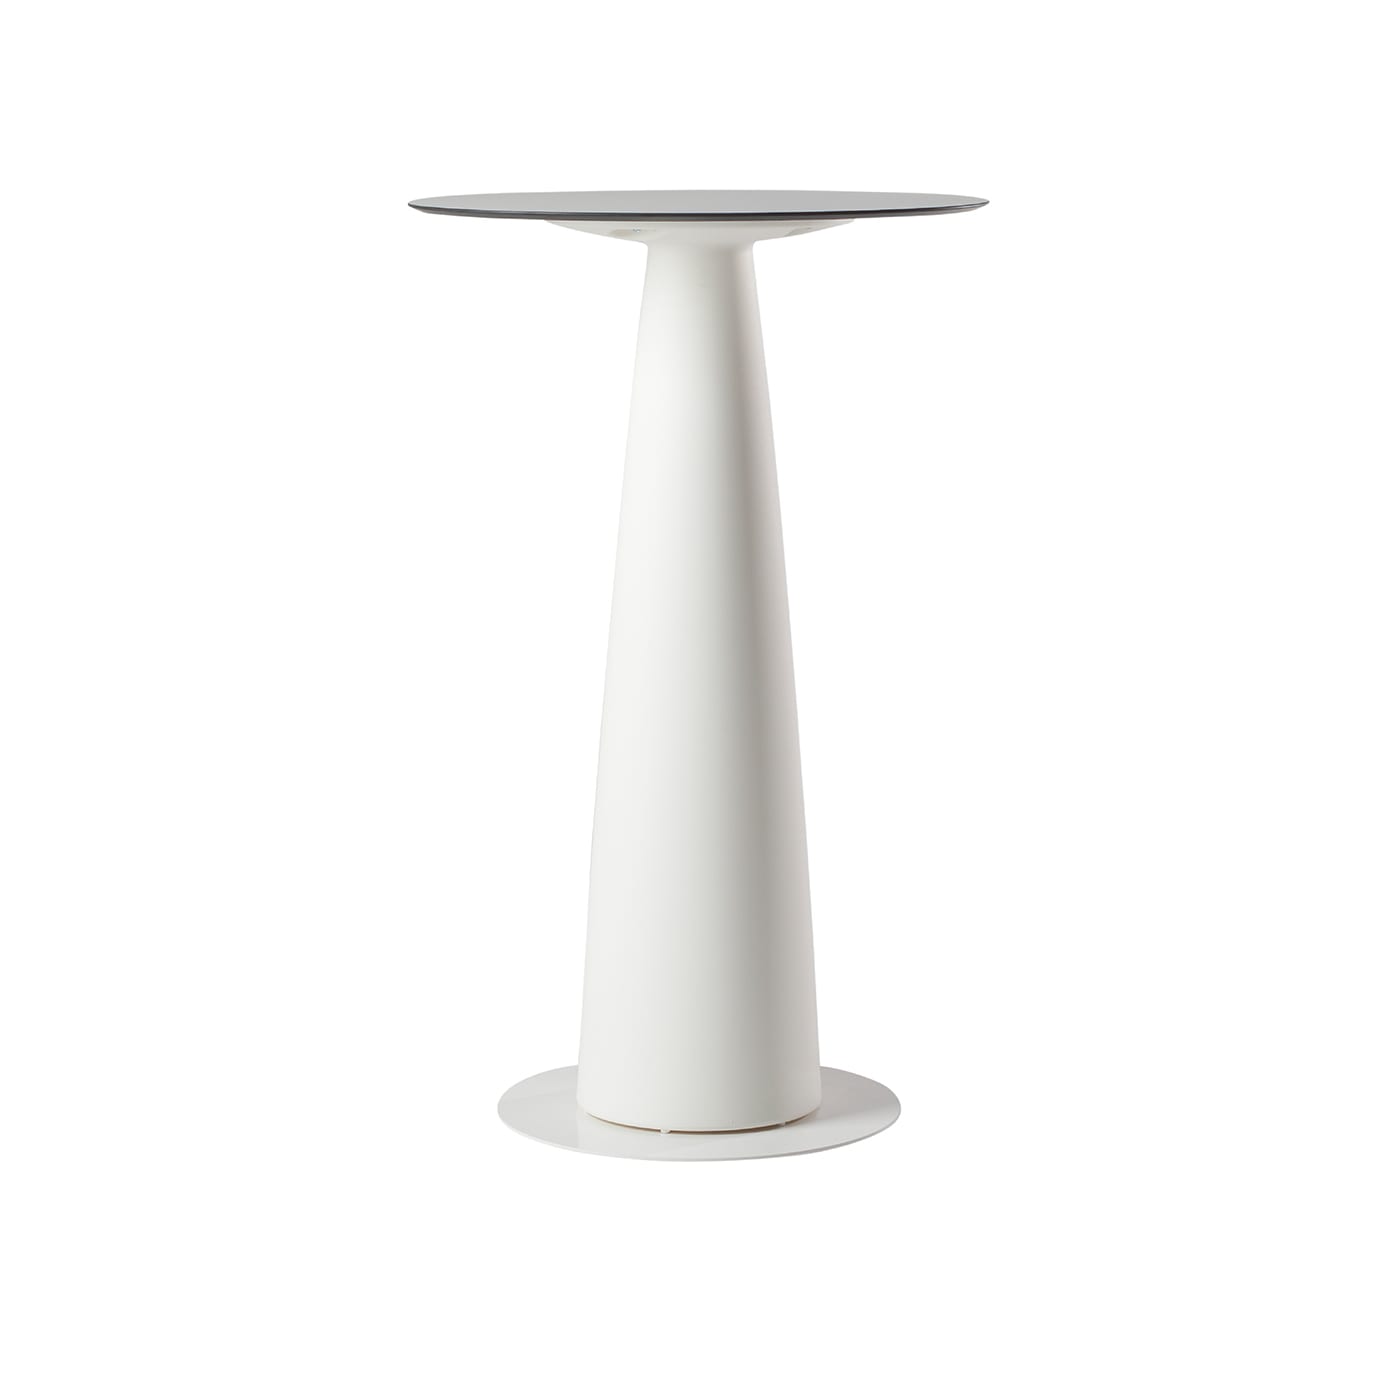 Hopla White Accent Table - Slide